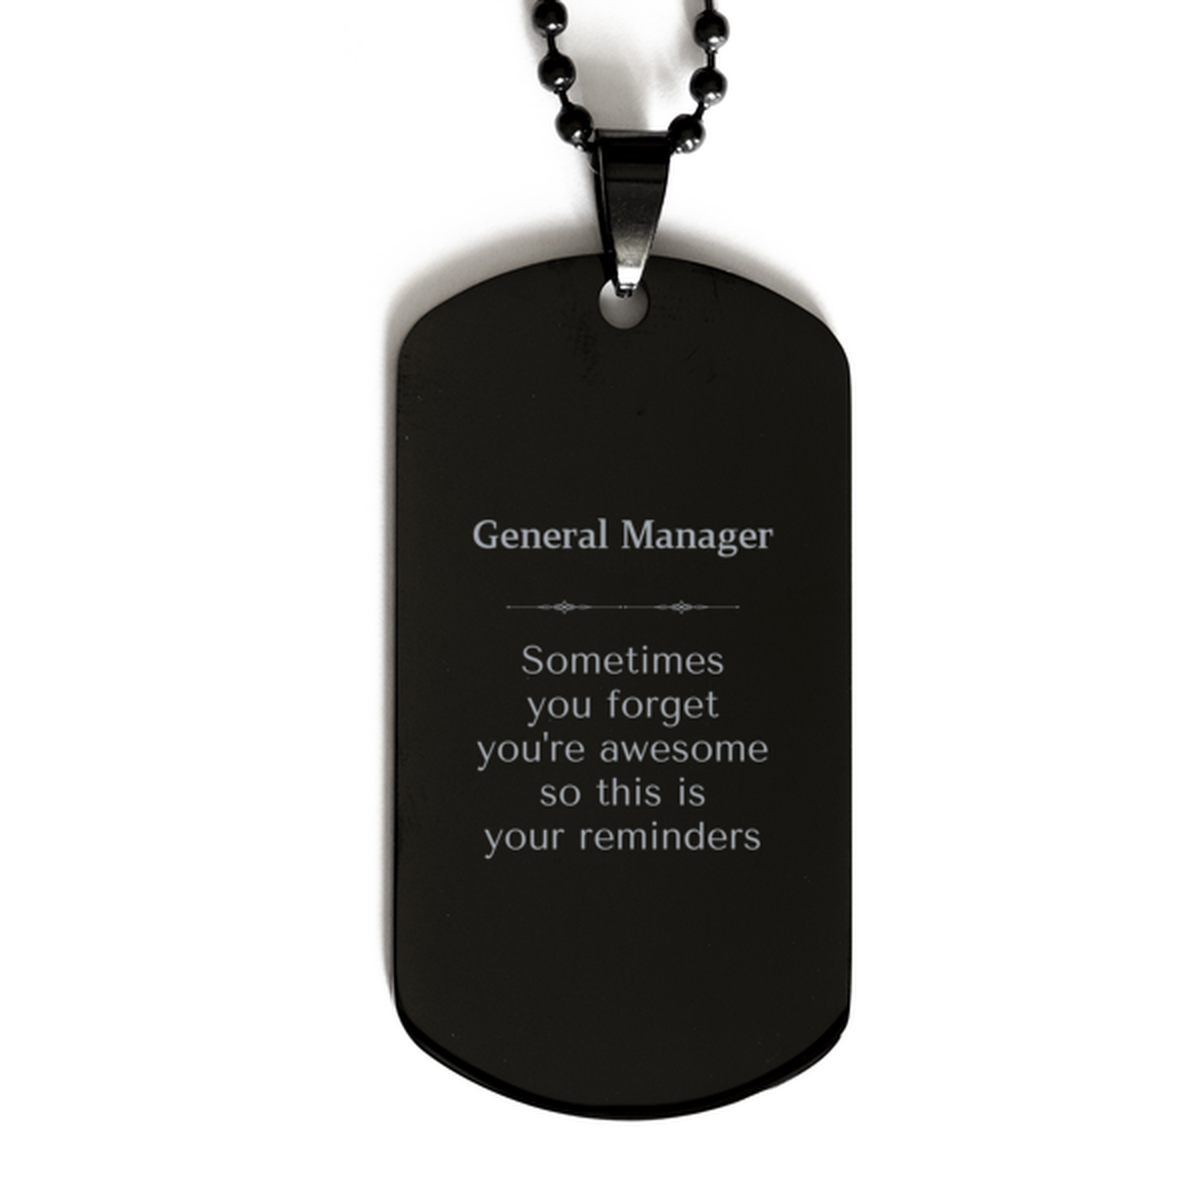 Sentimental General Manager Black Dog Tag, General Manager Sometimes you forget you're awesome so this is your reminders, Graduation Christmas Birthday Gifts for General Manager, Men, Women, Coworkers